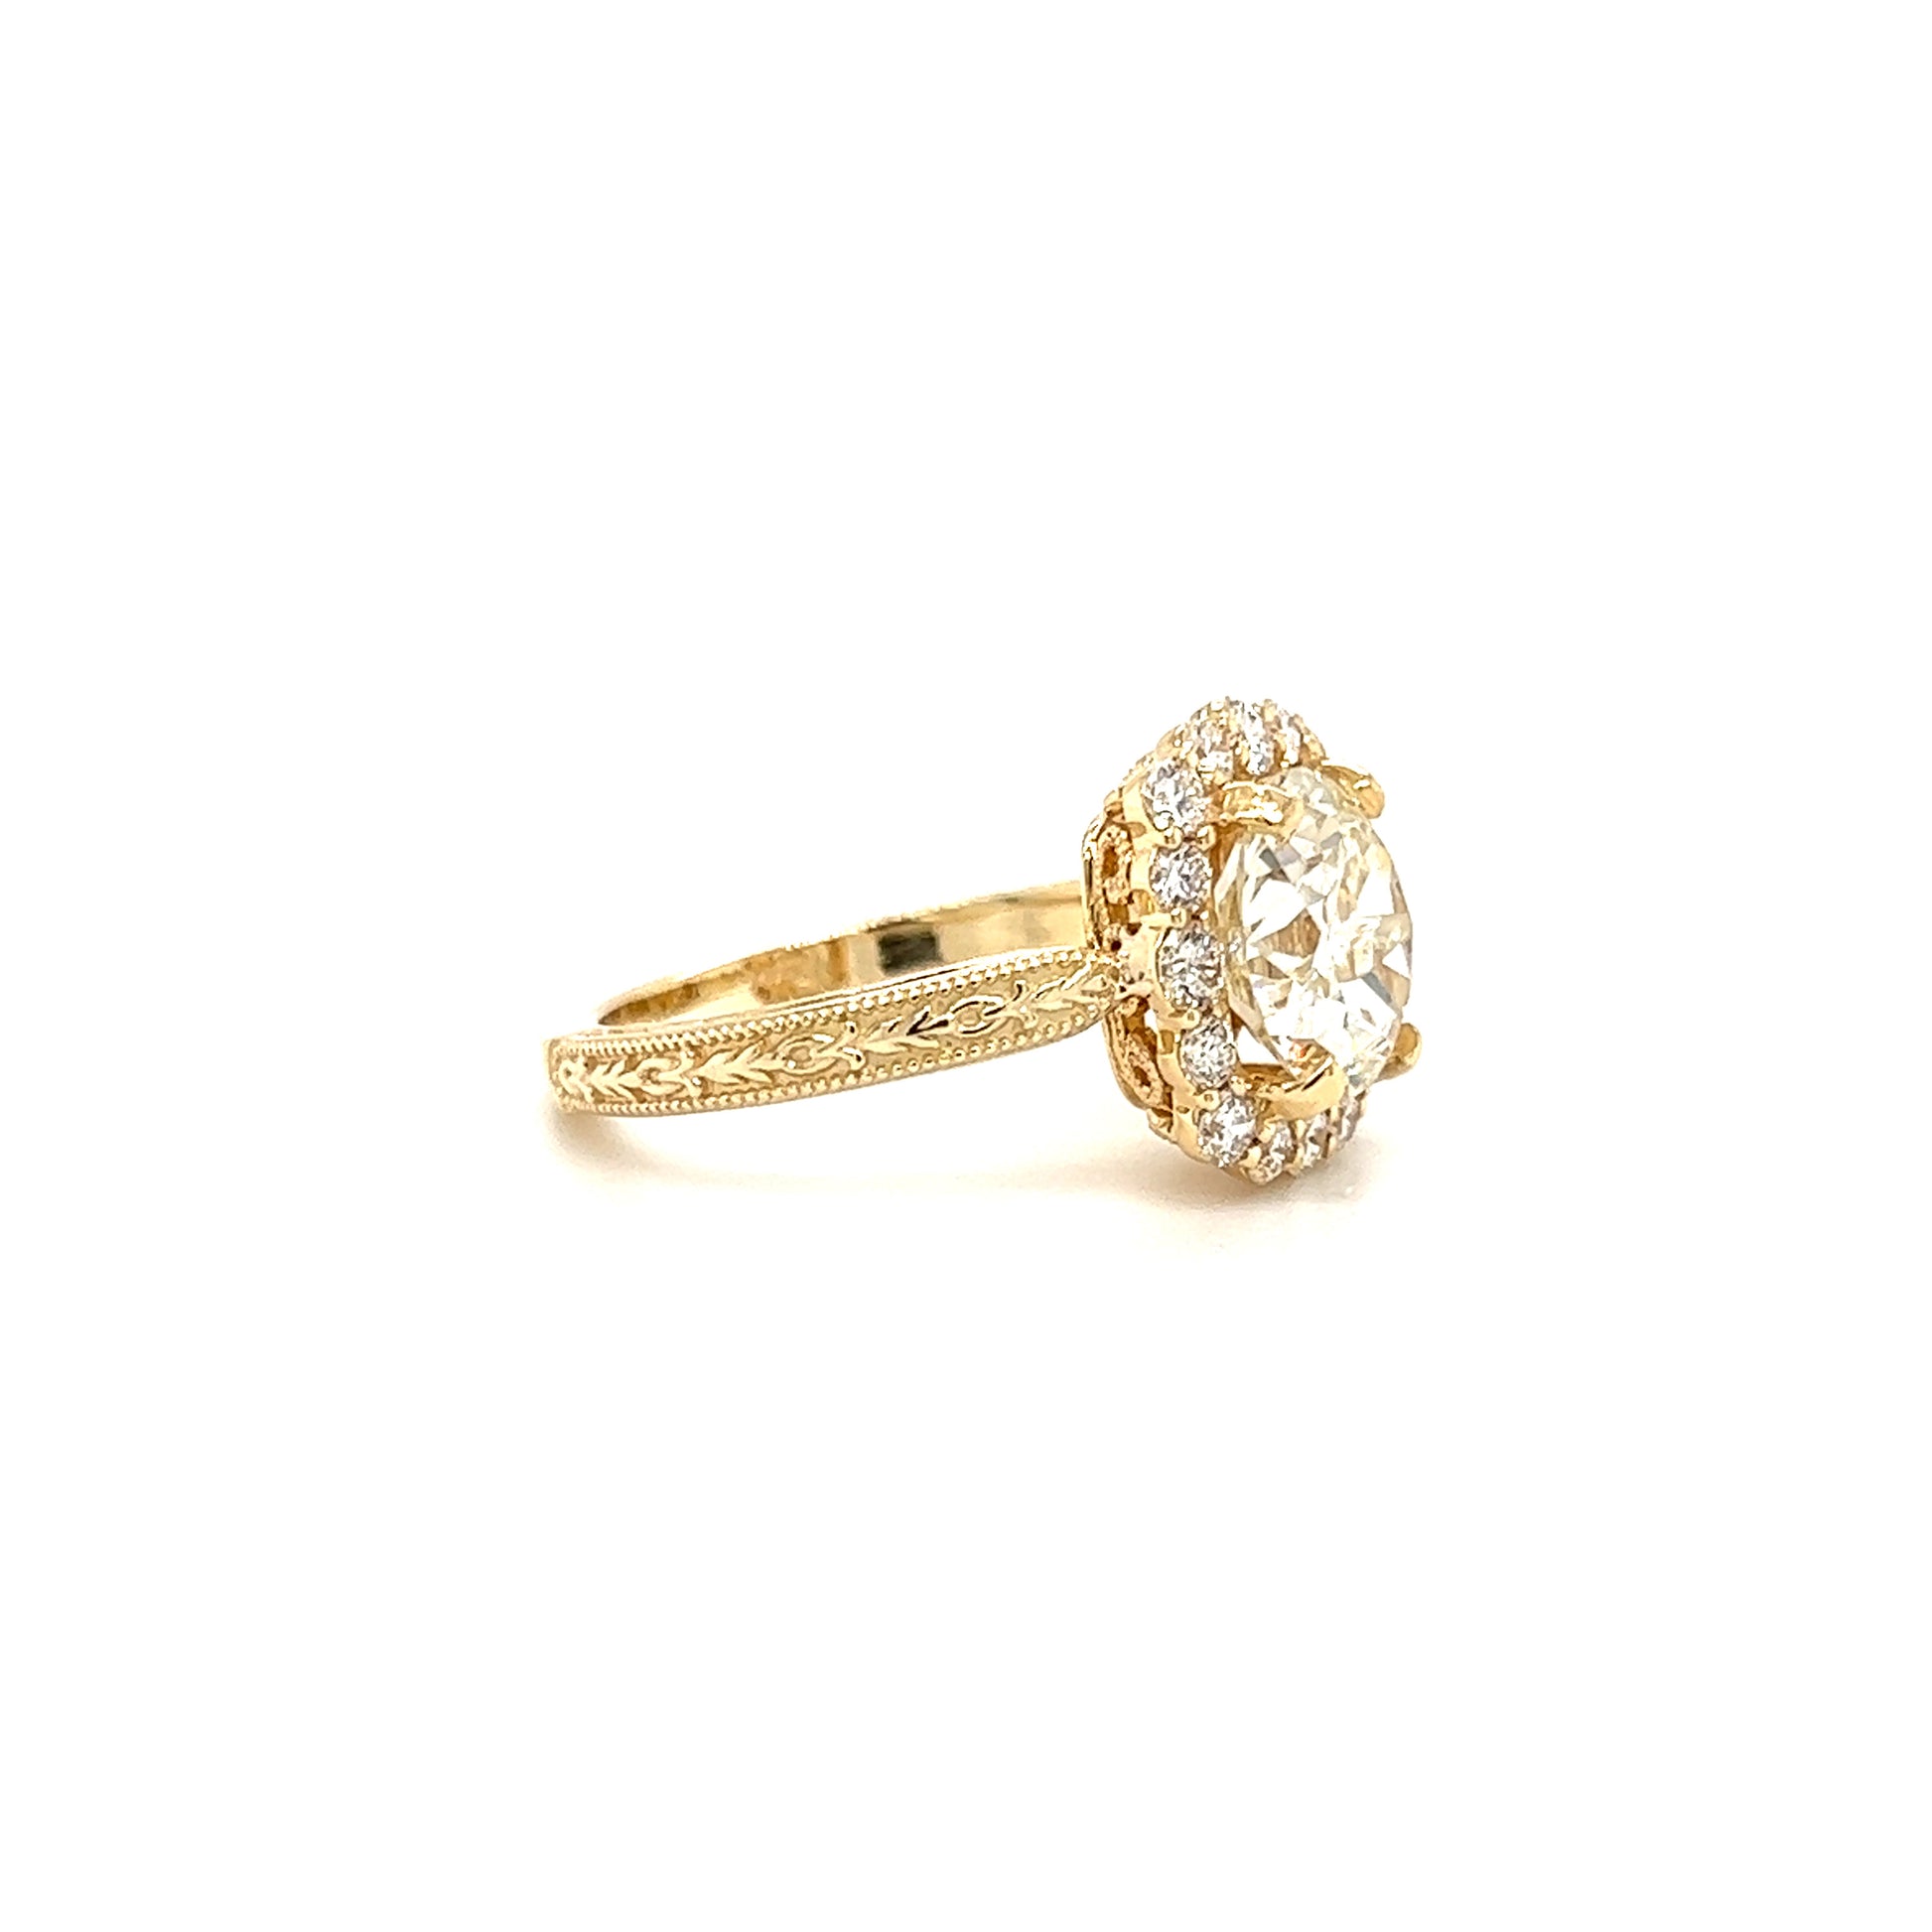 Round Diamond 2.68ct Ring with Diamond Halo in 18K and 14K Yellow Gold Left Side View